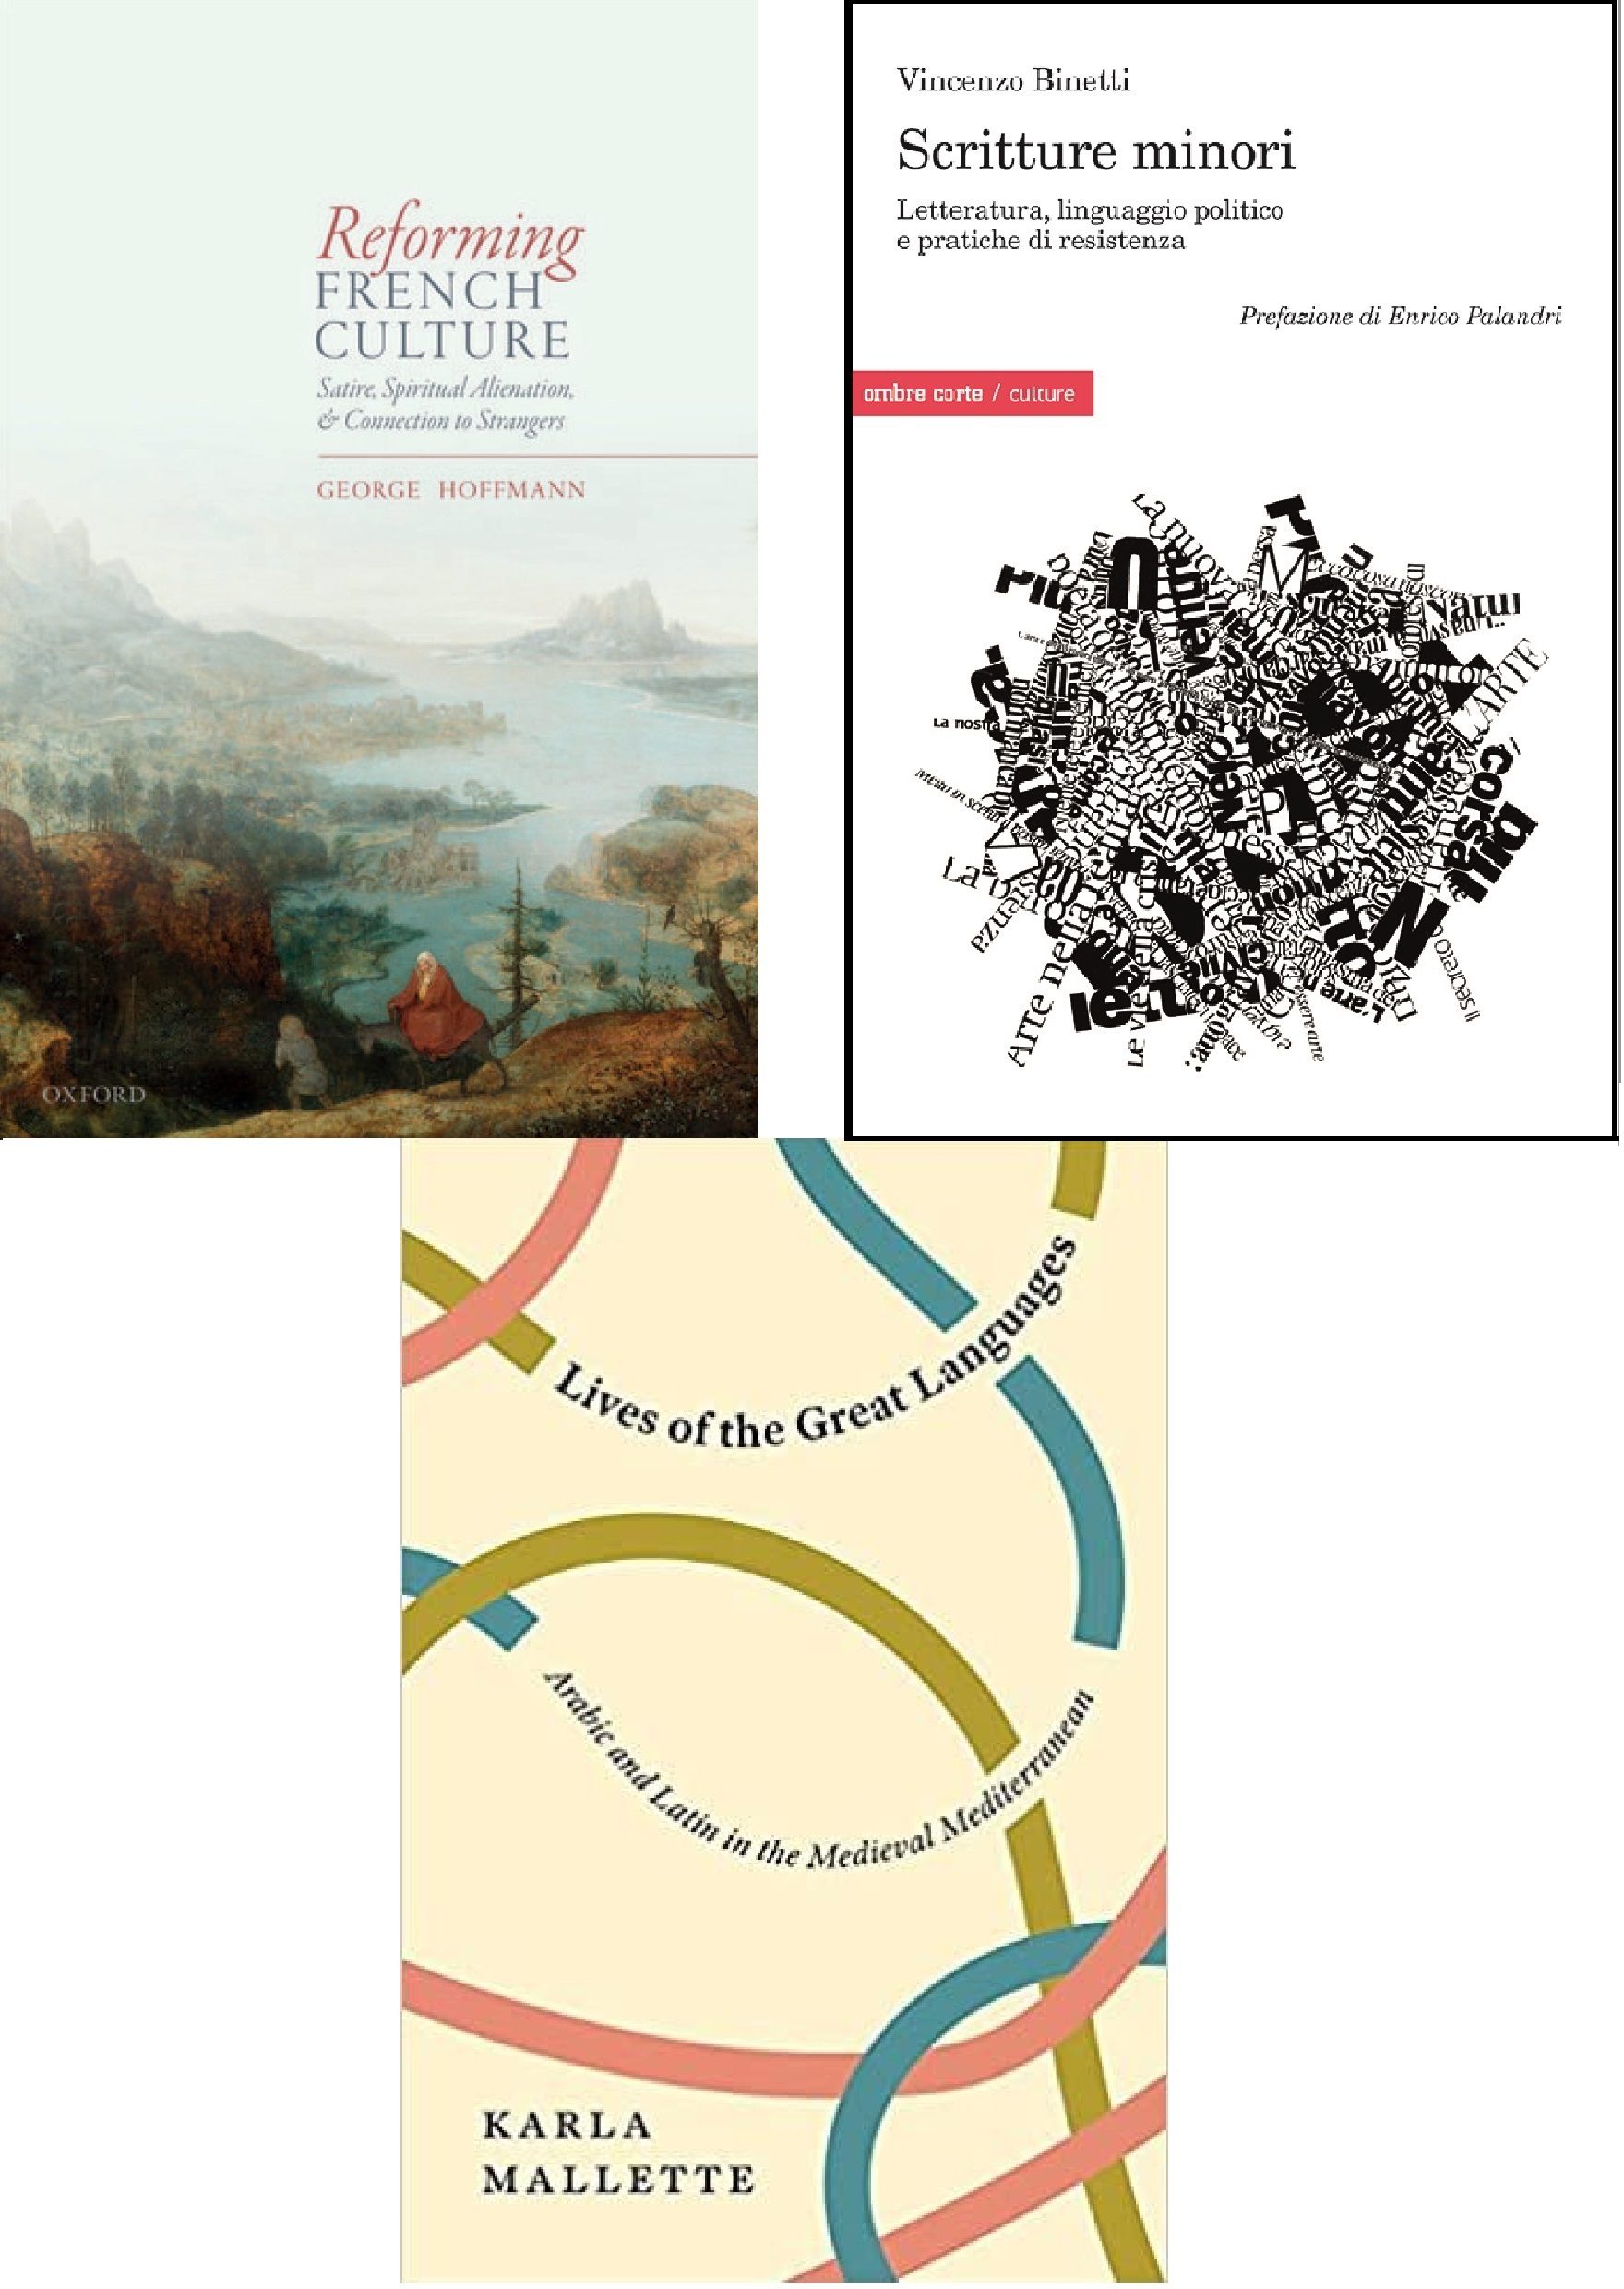 Image of three book covers. The book on the left is of "Reforming French Culture: Satire, Spiritual Alienation, & Connection to Strangers" by U-M faculty member George Hoffman. It features a landscape of mountains and a bay. A woman on a mule is seen with a man whose face is turned away. The book on the right is of "Scritture minori: Letteratura, linguaggio politico e pratiche di resistenza" by U-M faculty member Vincenzo Binetti. It is a white cover with black text words crossing over each other in one big shape. The book on the bottom is of "Lives of the Great Languages: Arabic and Latin in the Medieval Mediterranean" by U-M faculty member Karla Mallette.